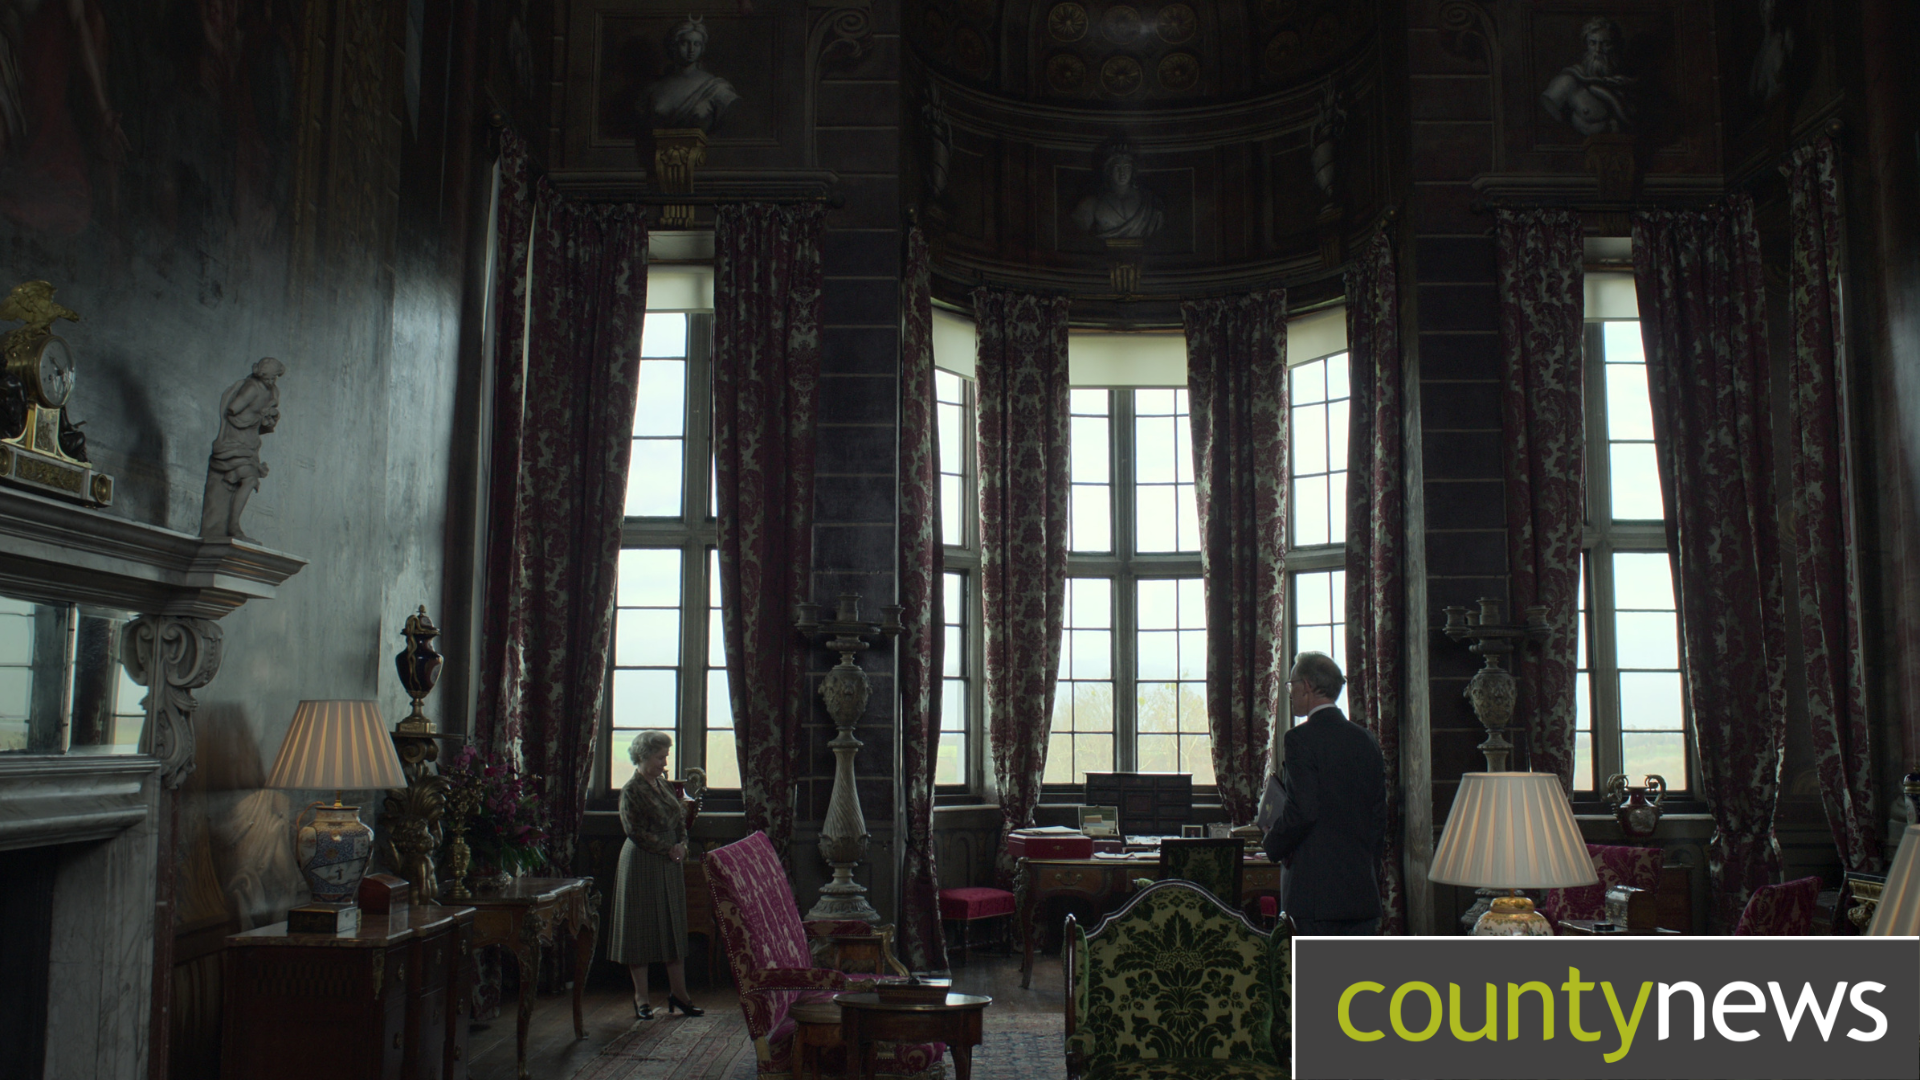 A shot of The Crown filmed at Burghley House